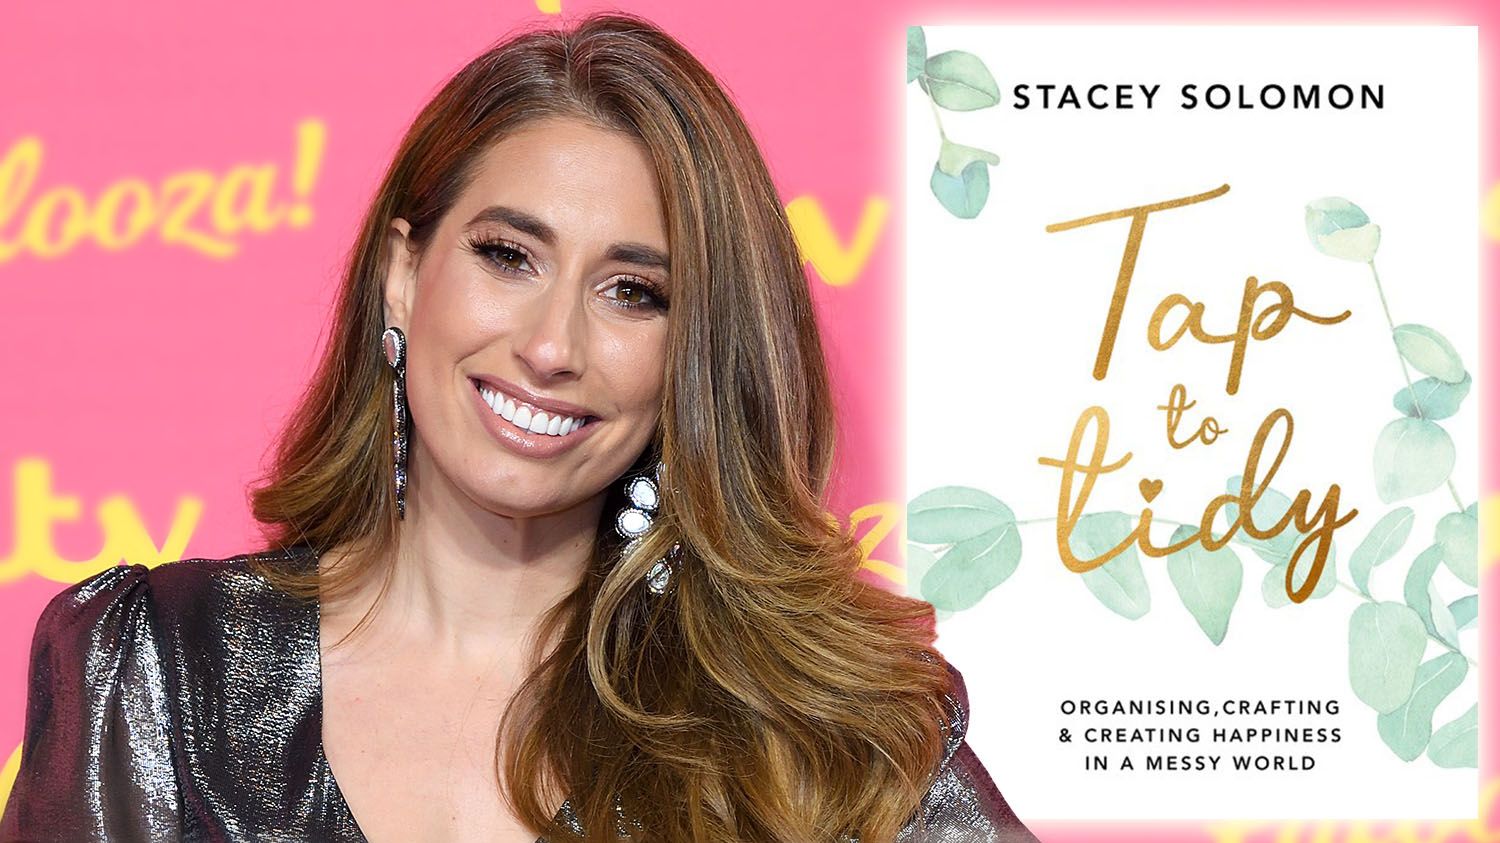 Mom And Sonxxxxxx Hd - Stacey Solomon releasing her book 'Tap To Tidy'